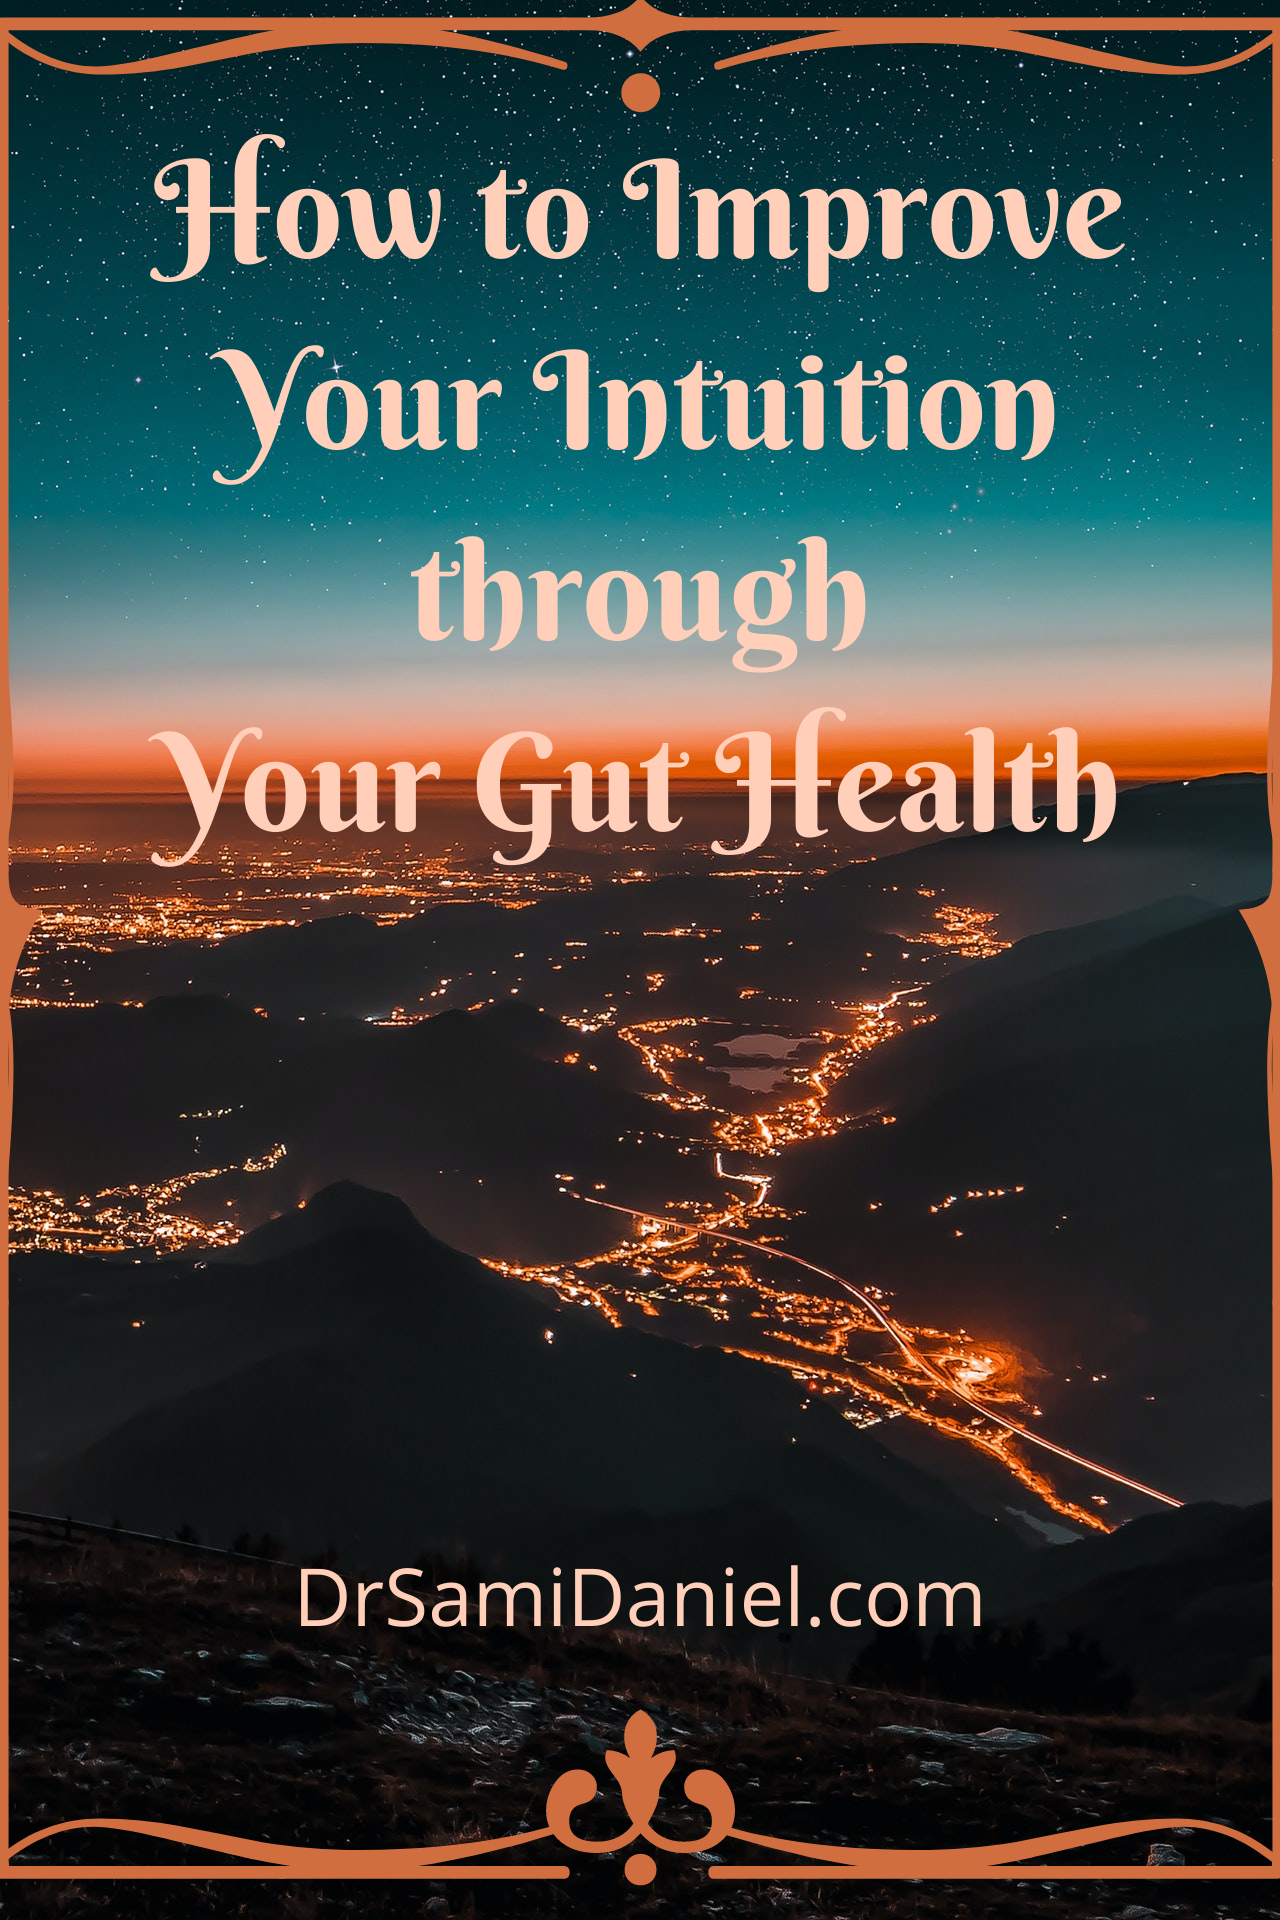 Improve gut health and intuition